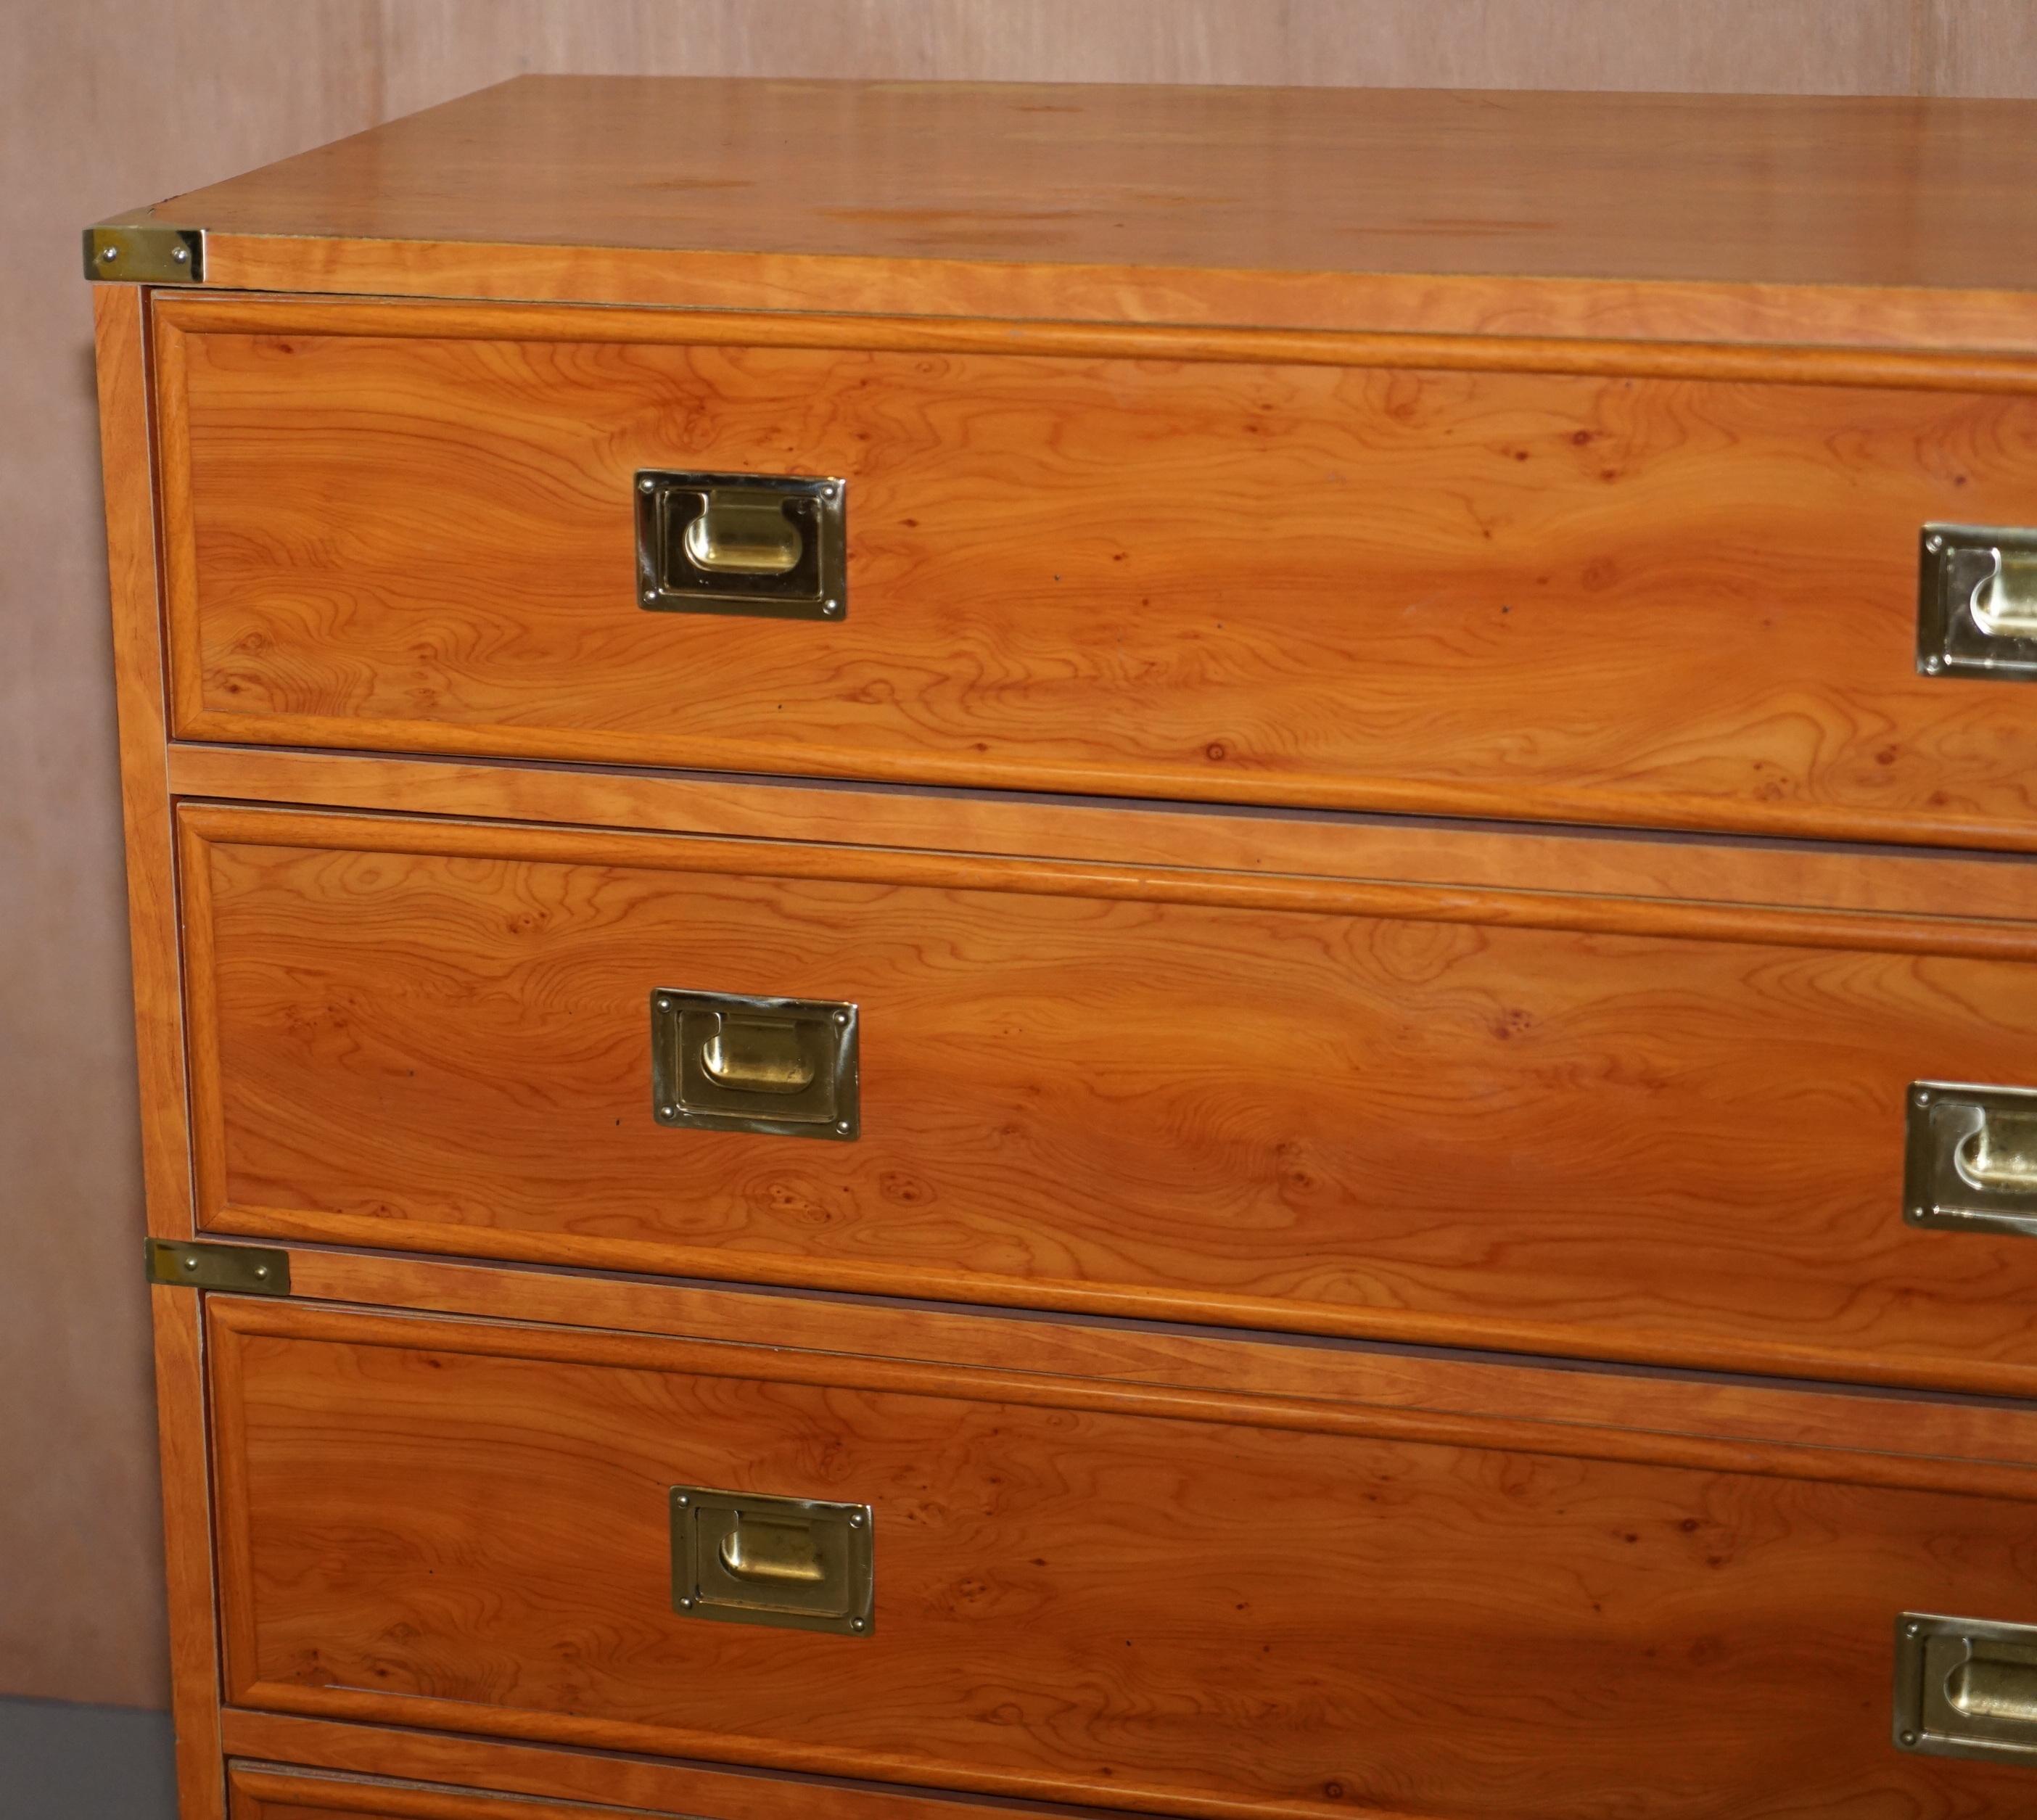 Campagne Lovely Vintage Meubles Gautier Made in France Military Campaign Campaigner Chest of Drawers en vente